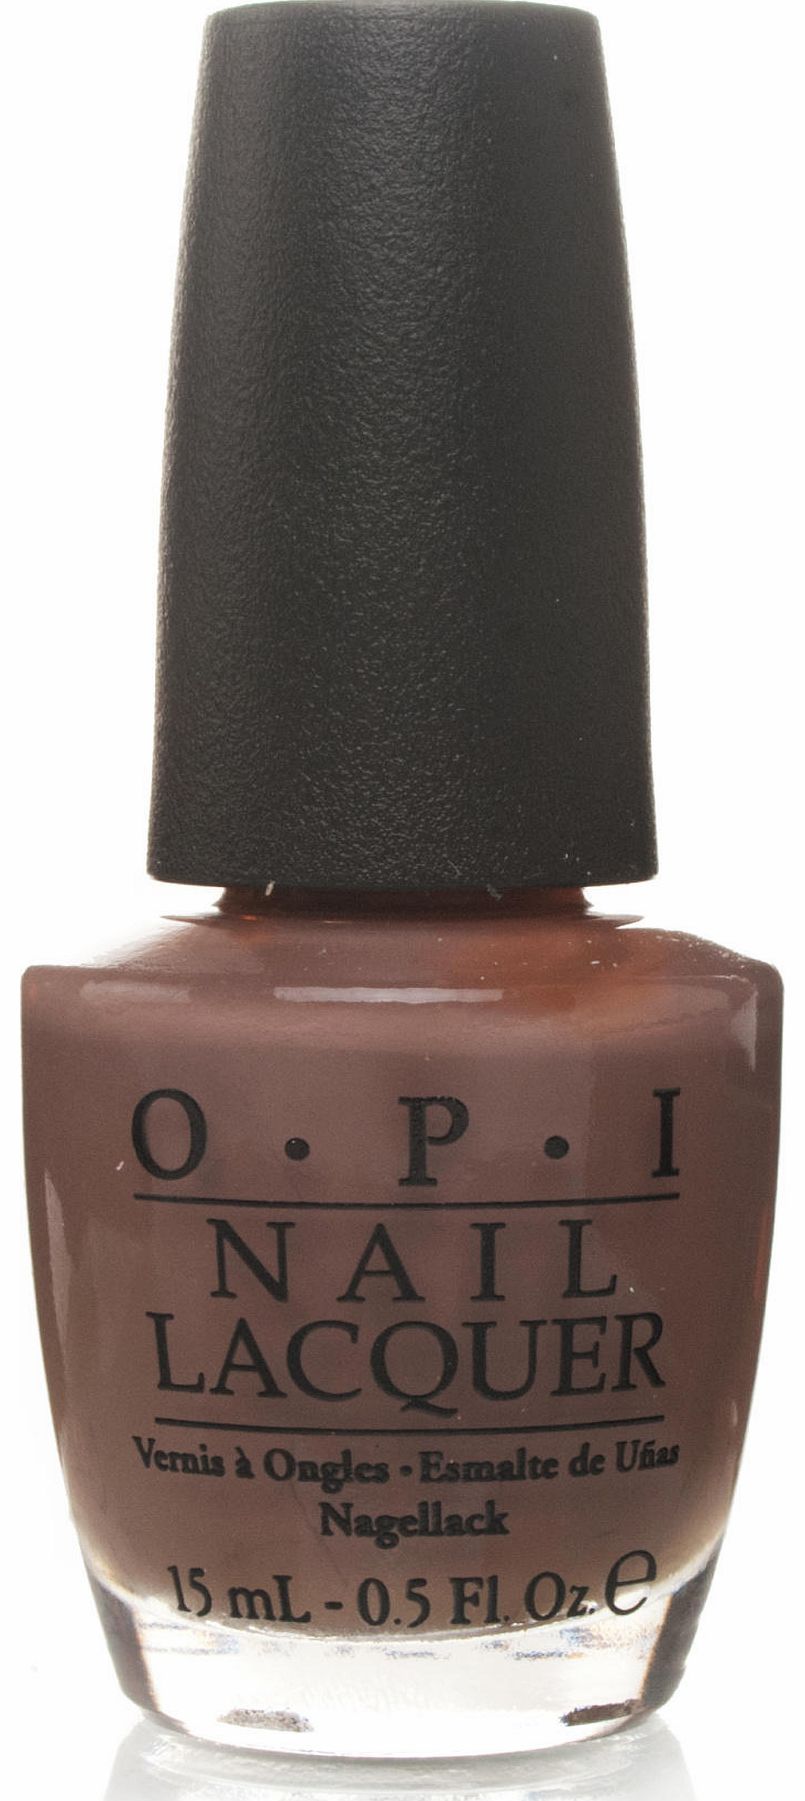 OPI Over the Taupe Nail Lacquer